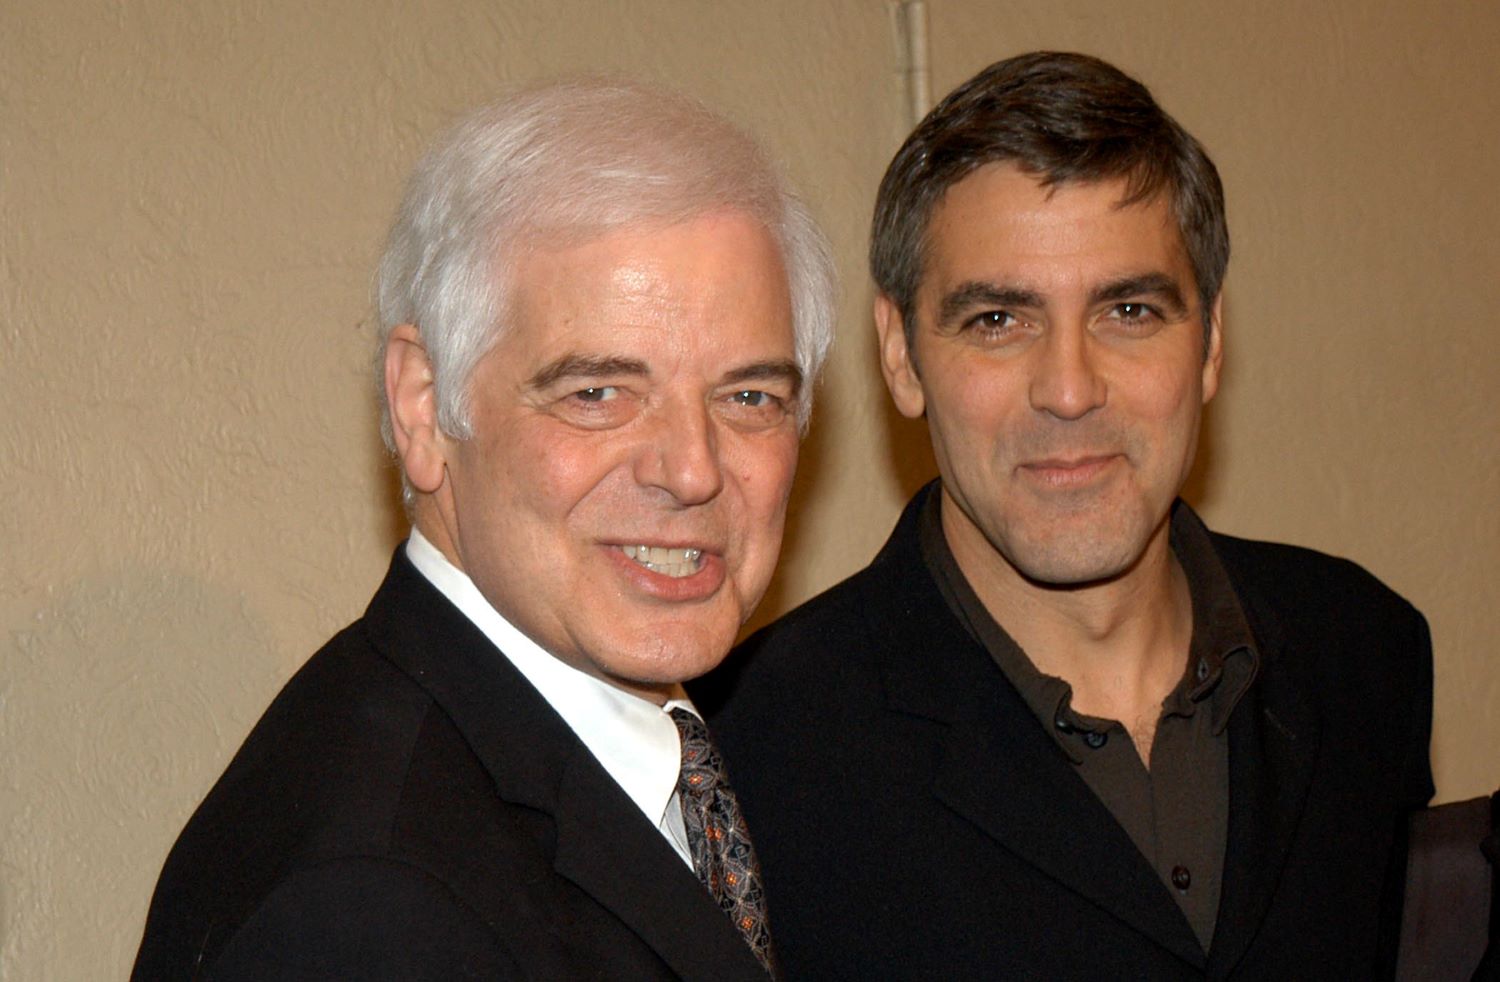 George Clooney and his father, Nick Clooney, pose for cameras at the premiere of 'Confessions of a Dangerous Mind' in 2002  